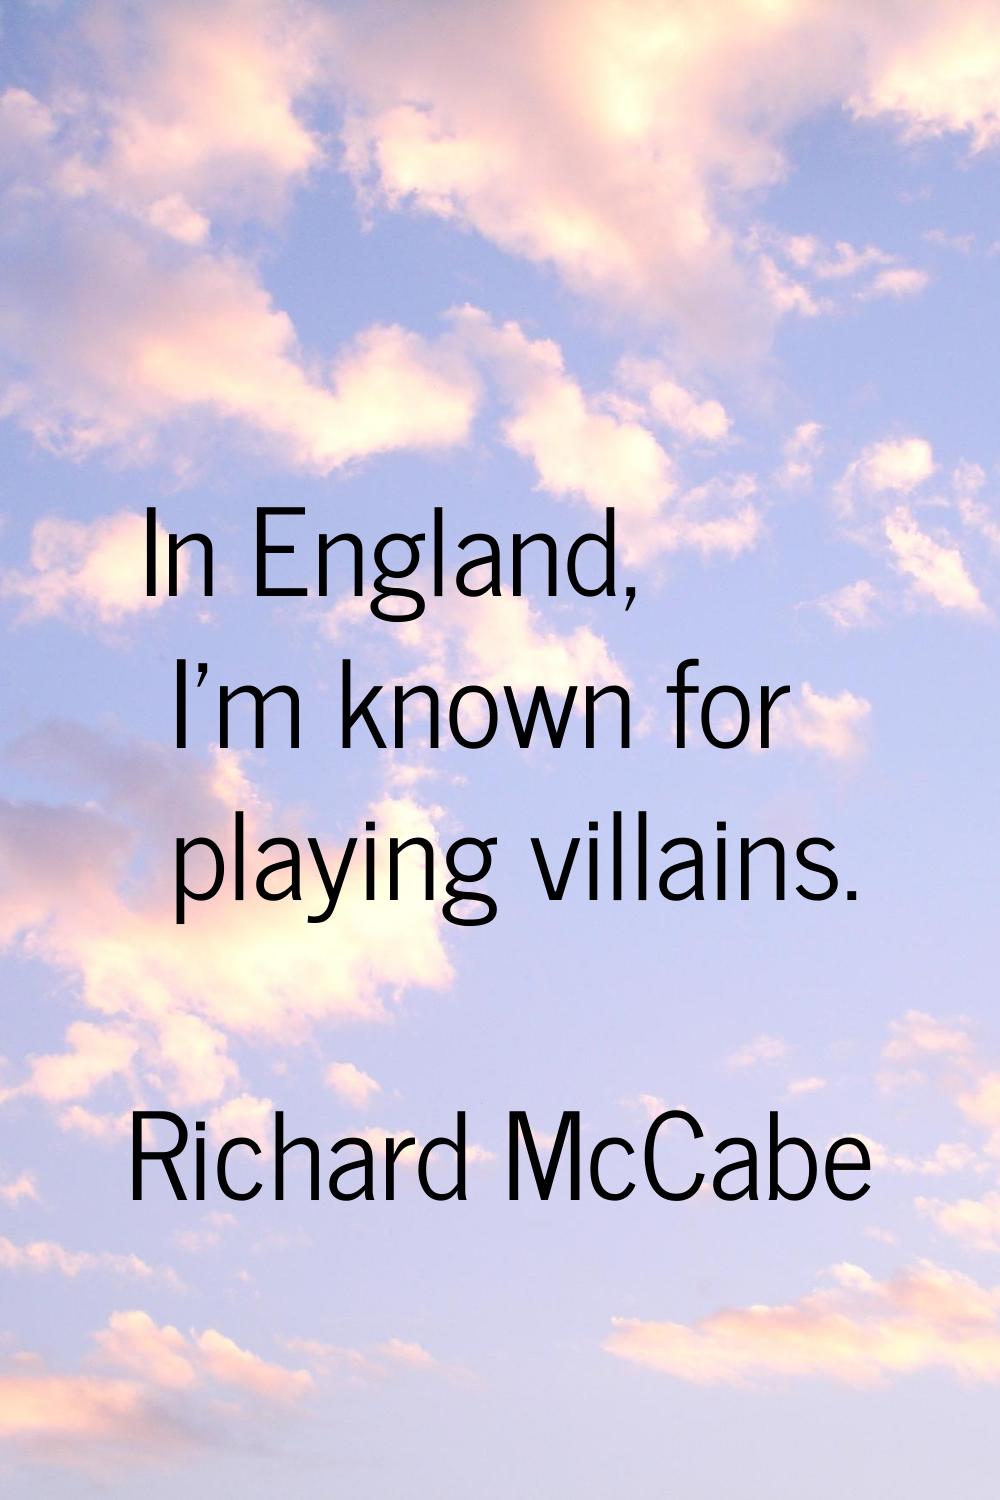 In England, I'm known for playing villains.